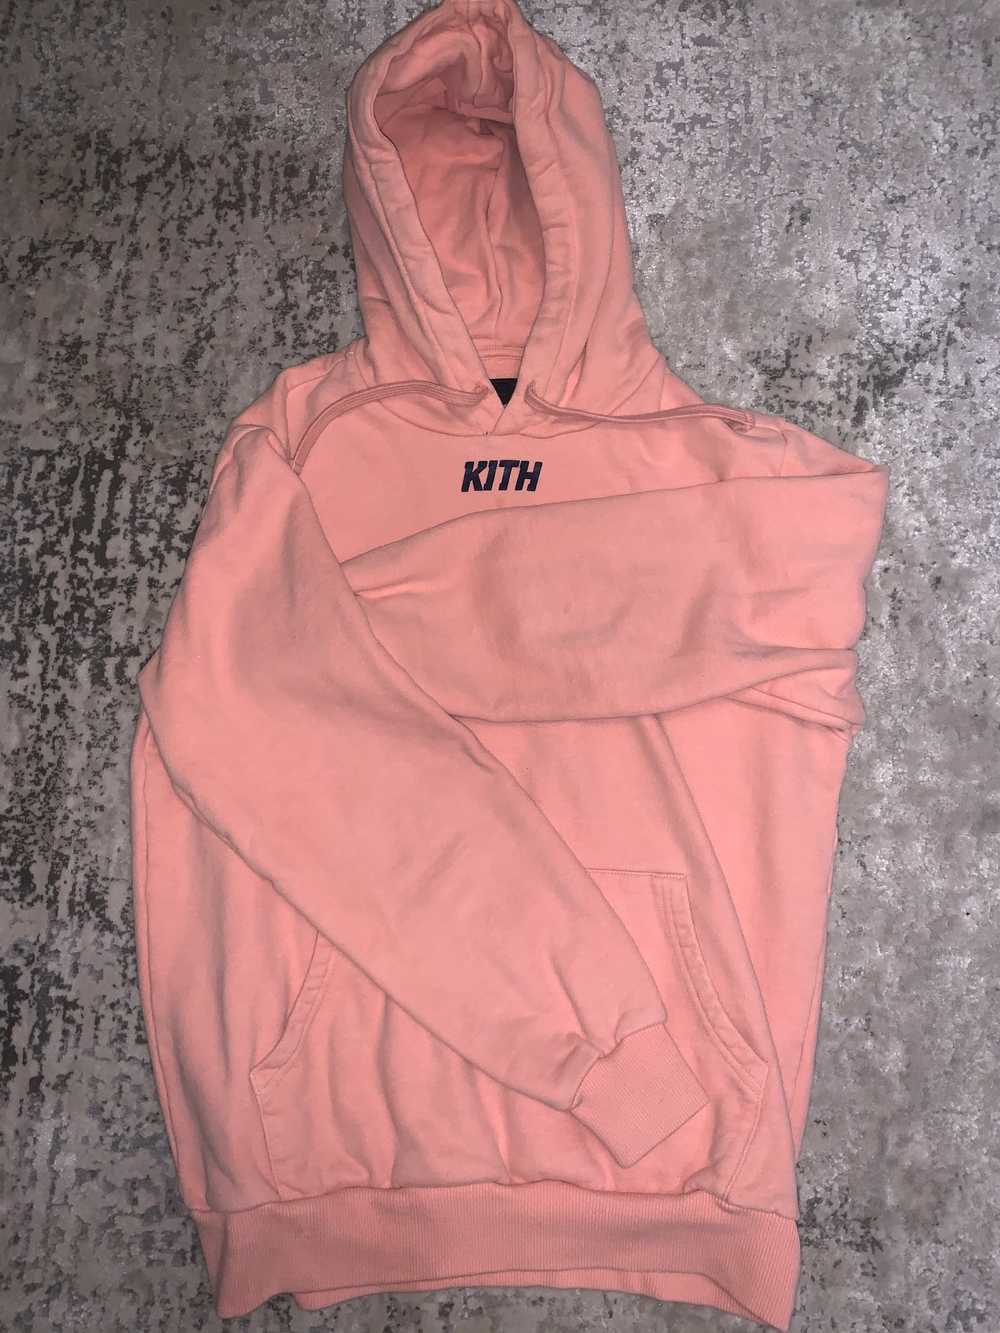 Kith Kith Legends Day Hoodie Salmon - image 4